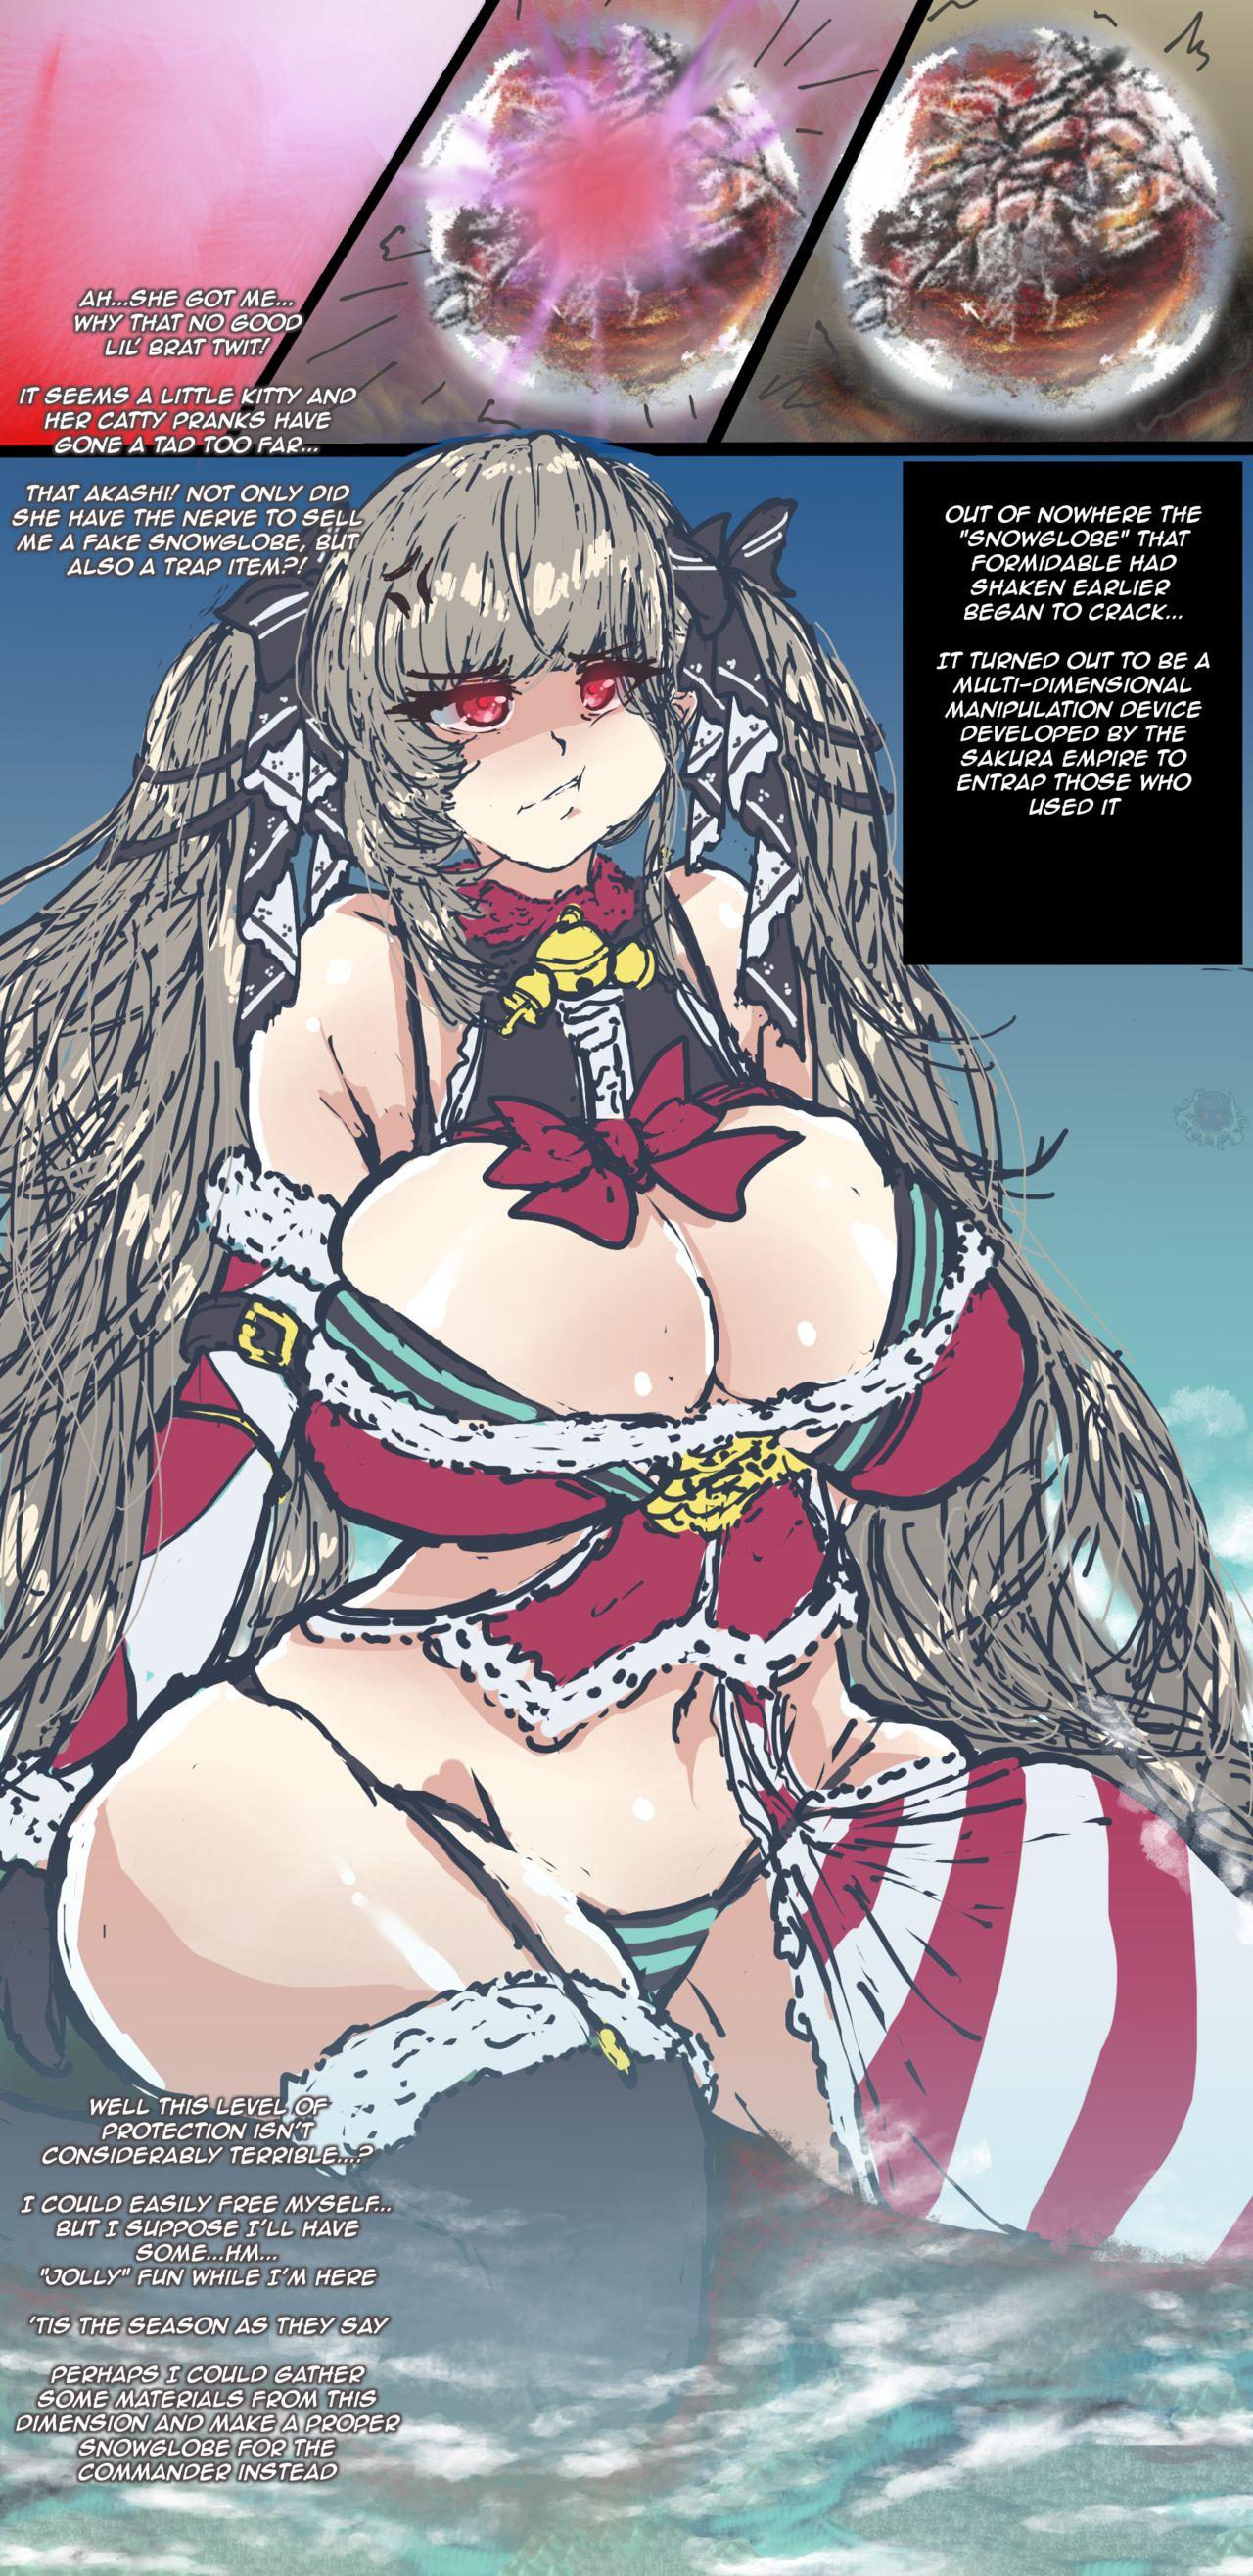 Lips Merry Formidable Christmas - Azur lane Gay Sex - Page 4